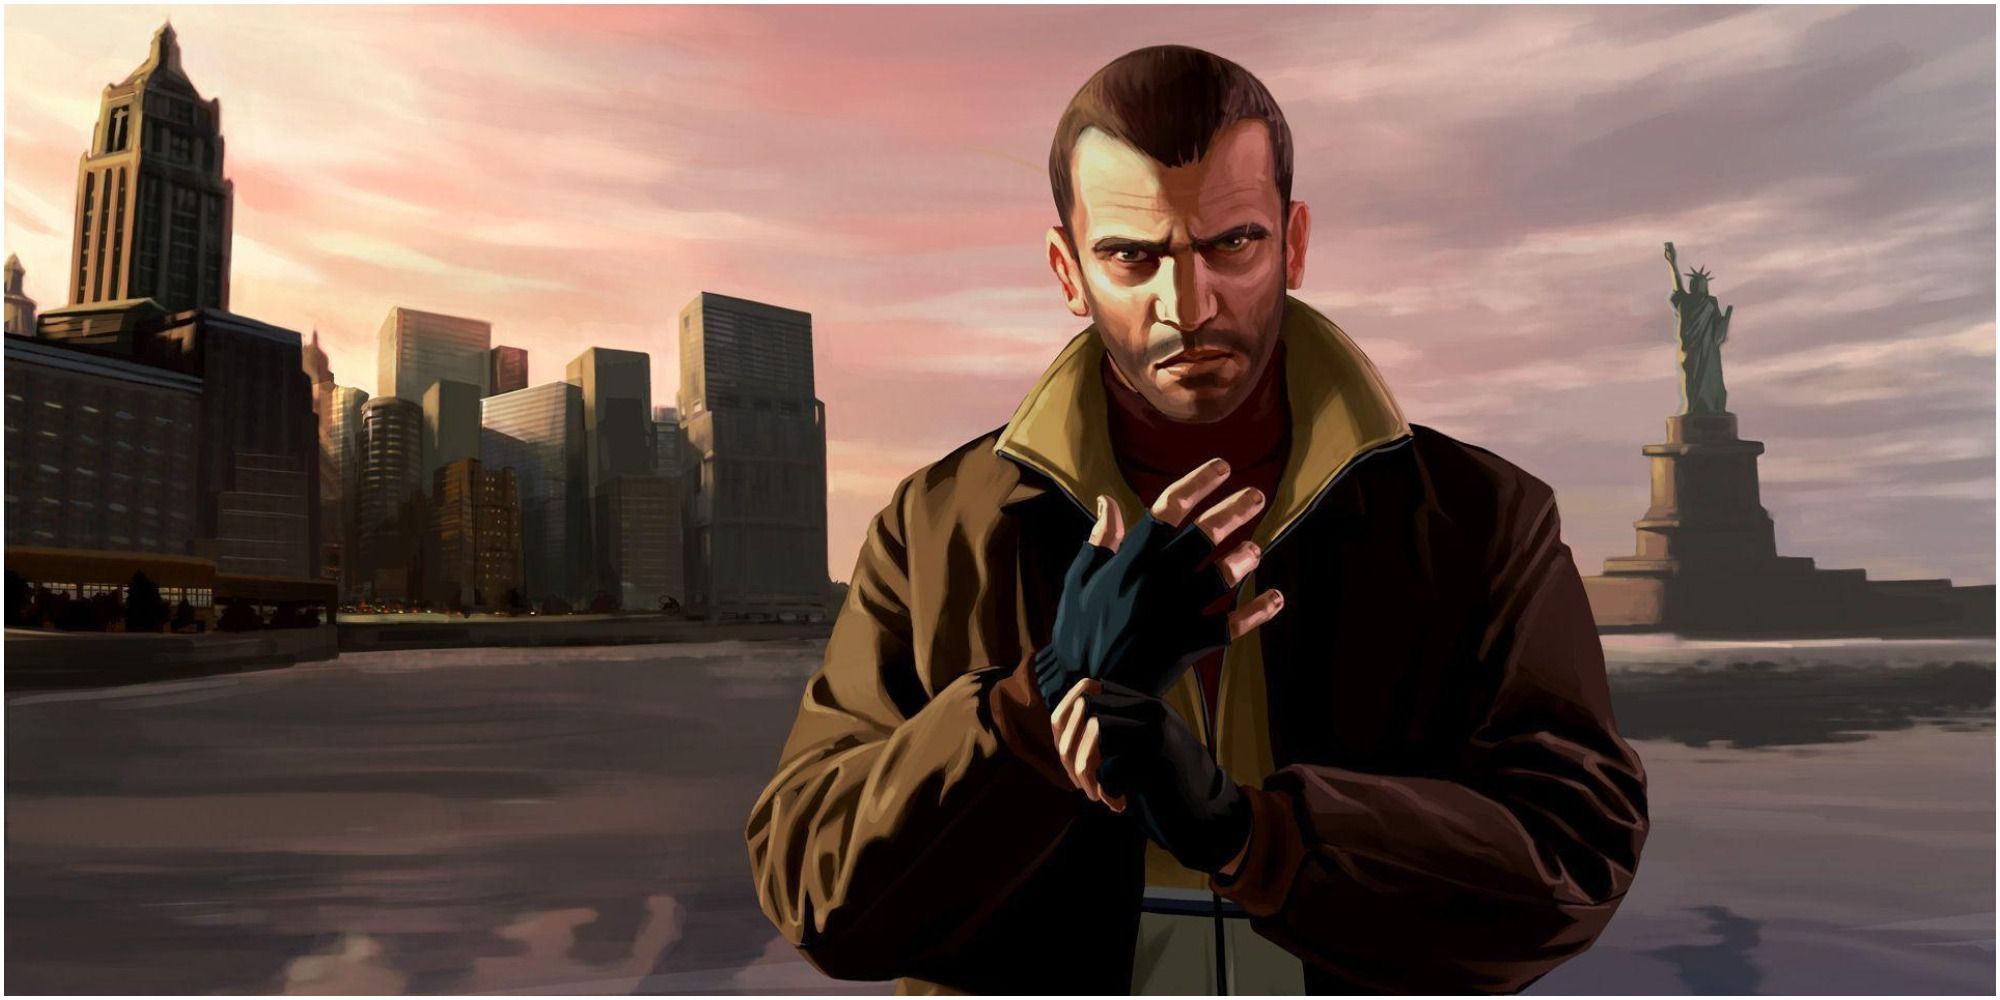 Niko Bellic of GTA 4 Is One of My Favorite Characters - Extra Punctuation